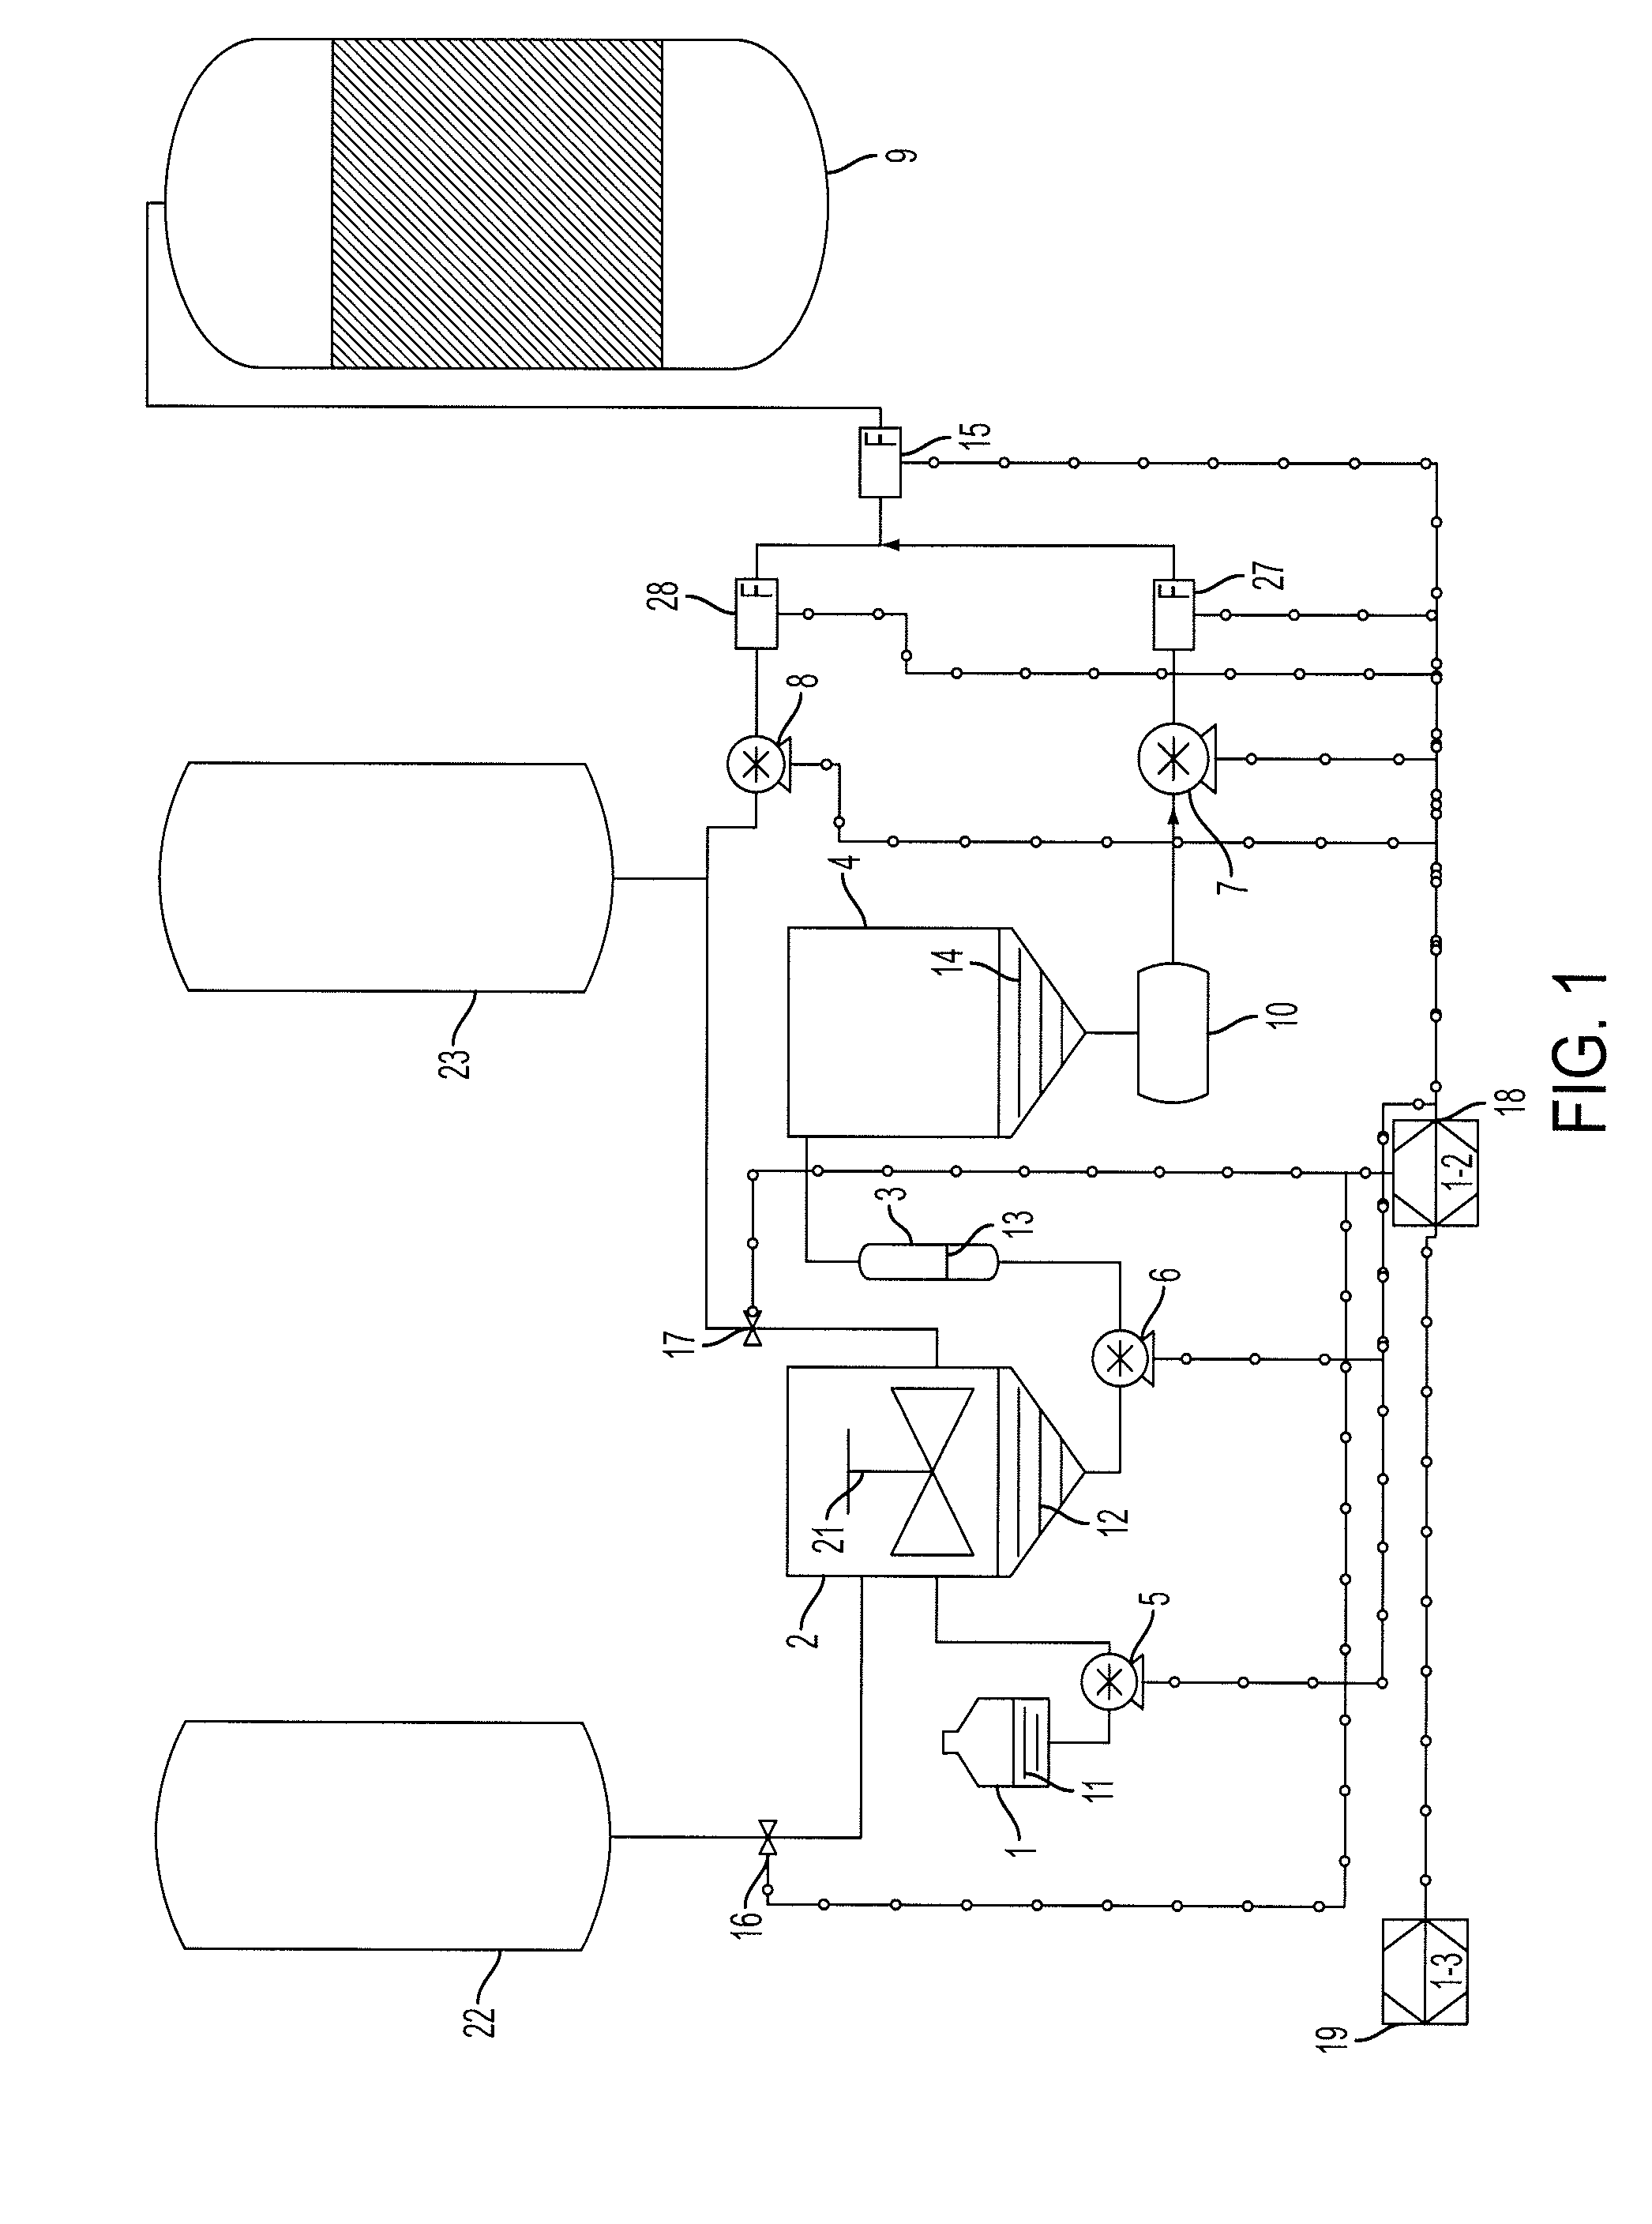 Method for reducing costs of enzymes in biorefinery